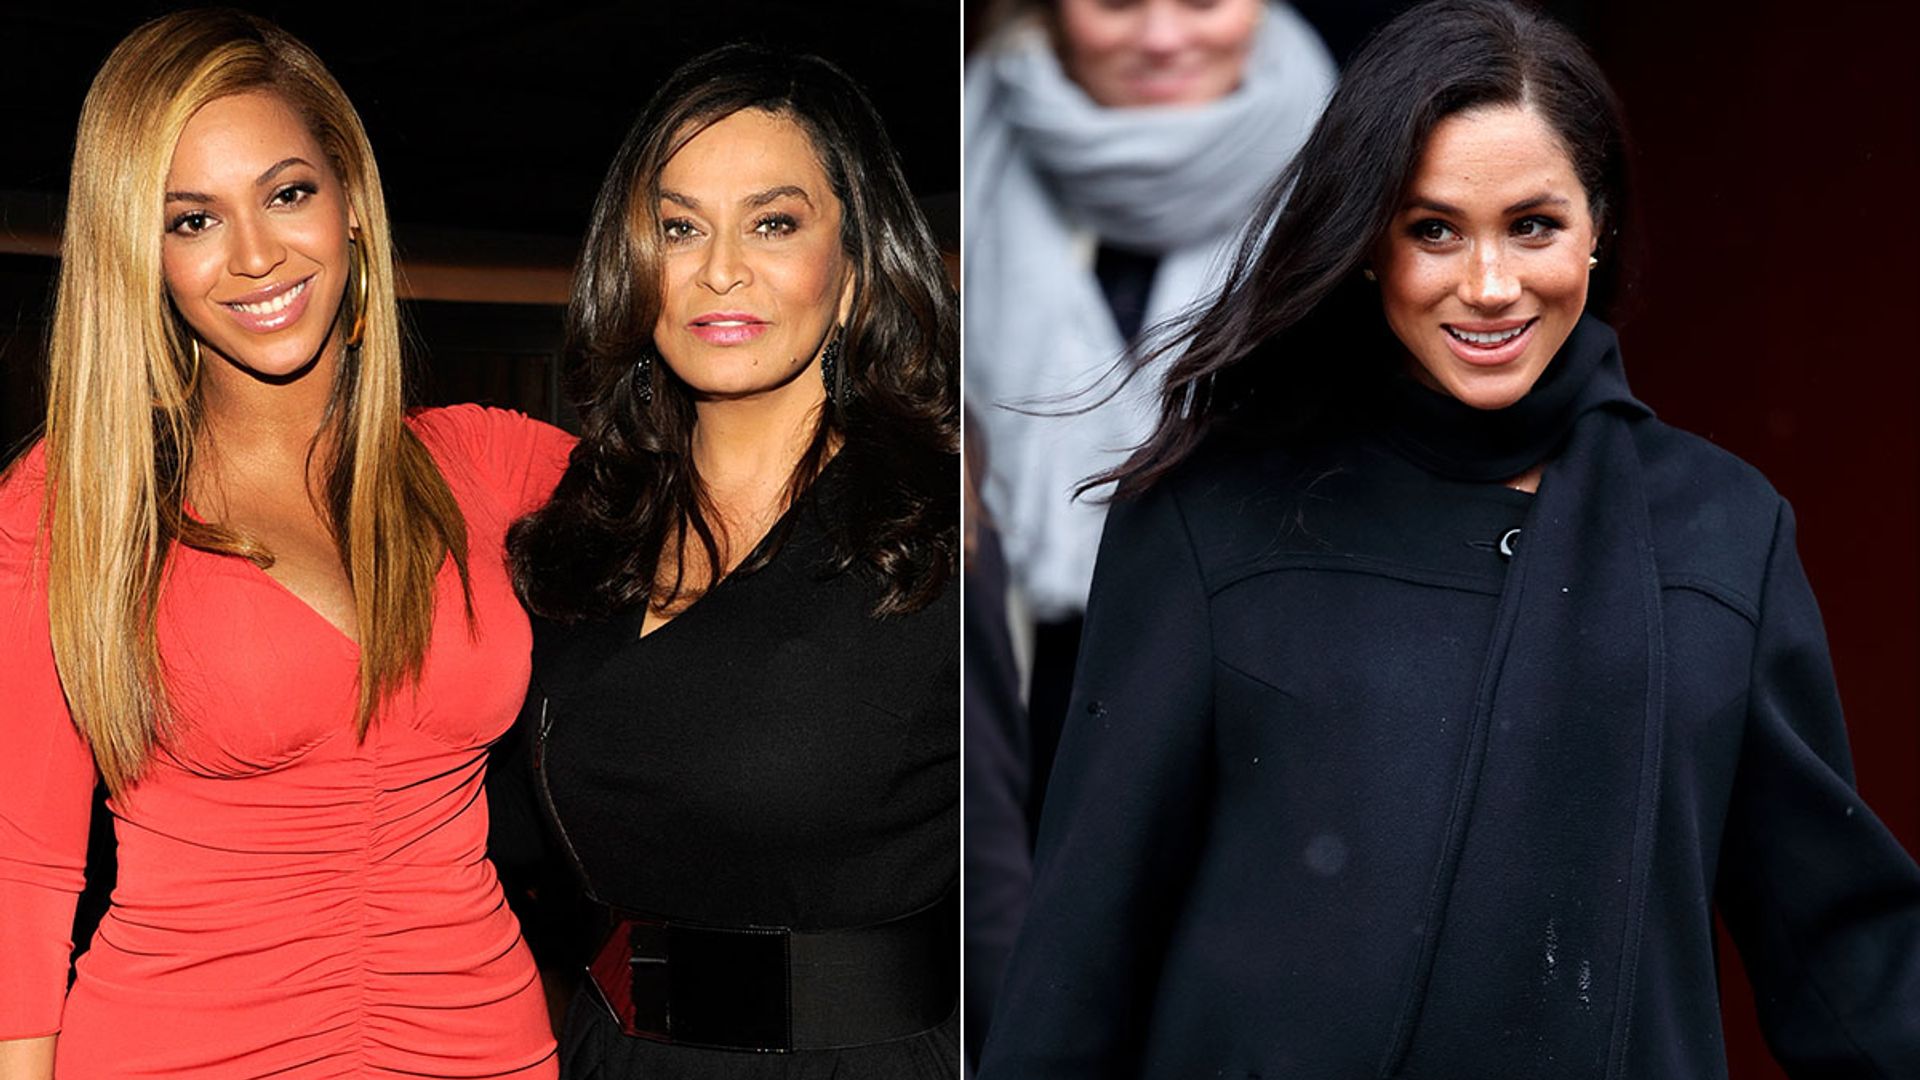 Beyonce's mother Tina Knowles heaps praise on Meghan Markle